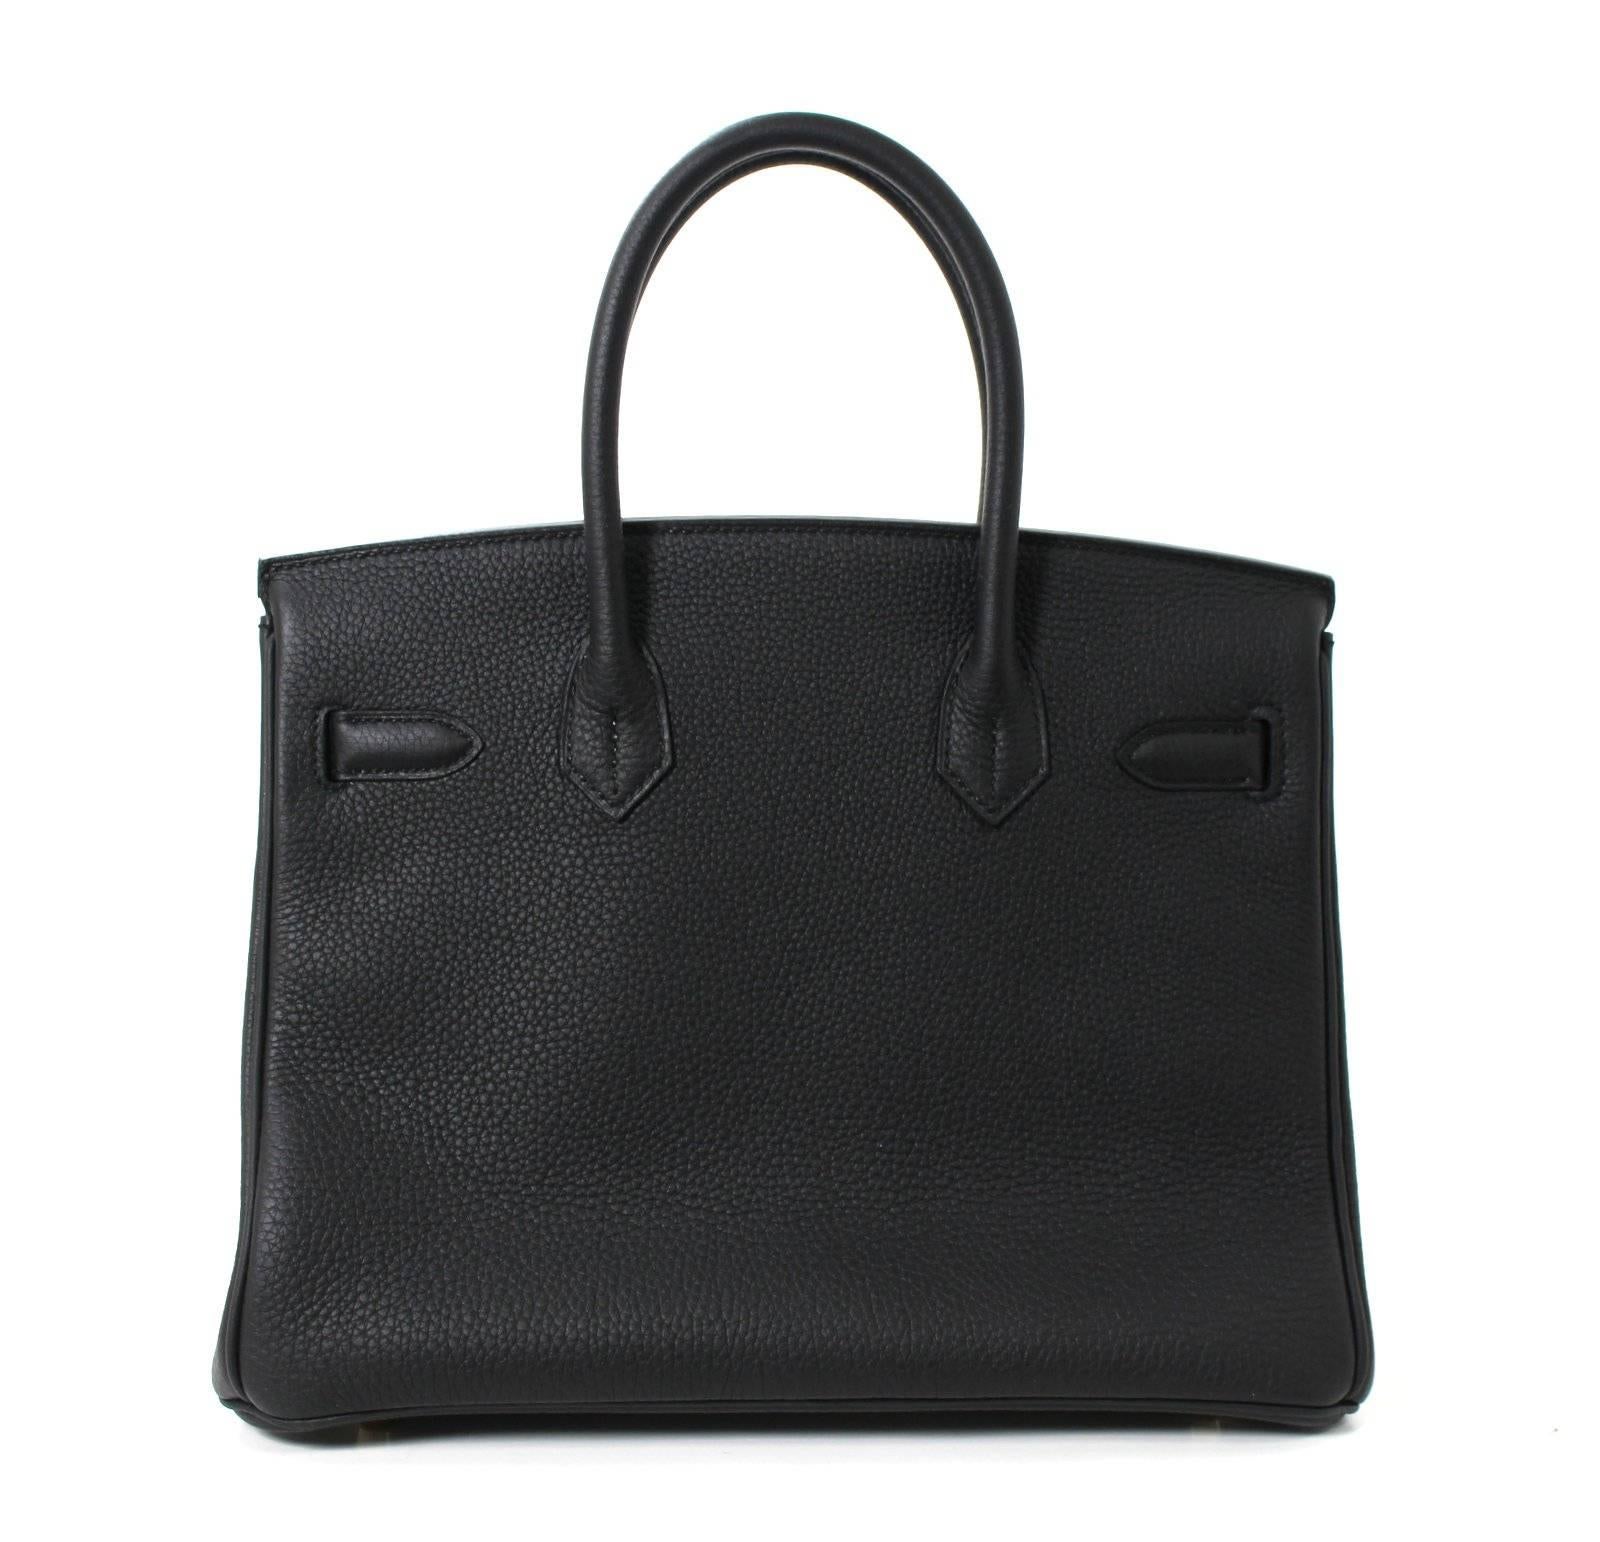 Pristine, store fresh condition (plastic on hardware) Hermès Birkin Bag in BLACK Togo Leather with GOLD hardware, 30 cm size.   
Crafted by hand and considered by many as the epitome of luxury items, Birkins are in extremely high demand but very